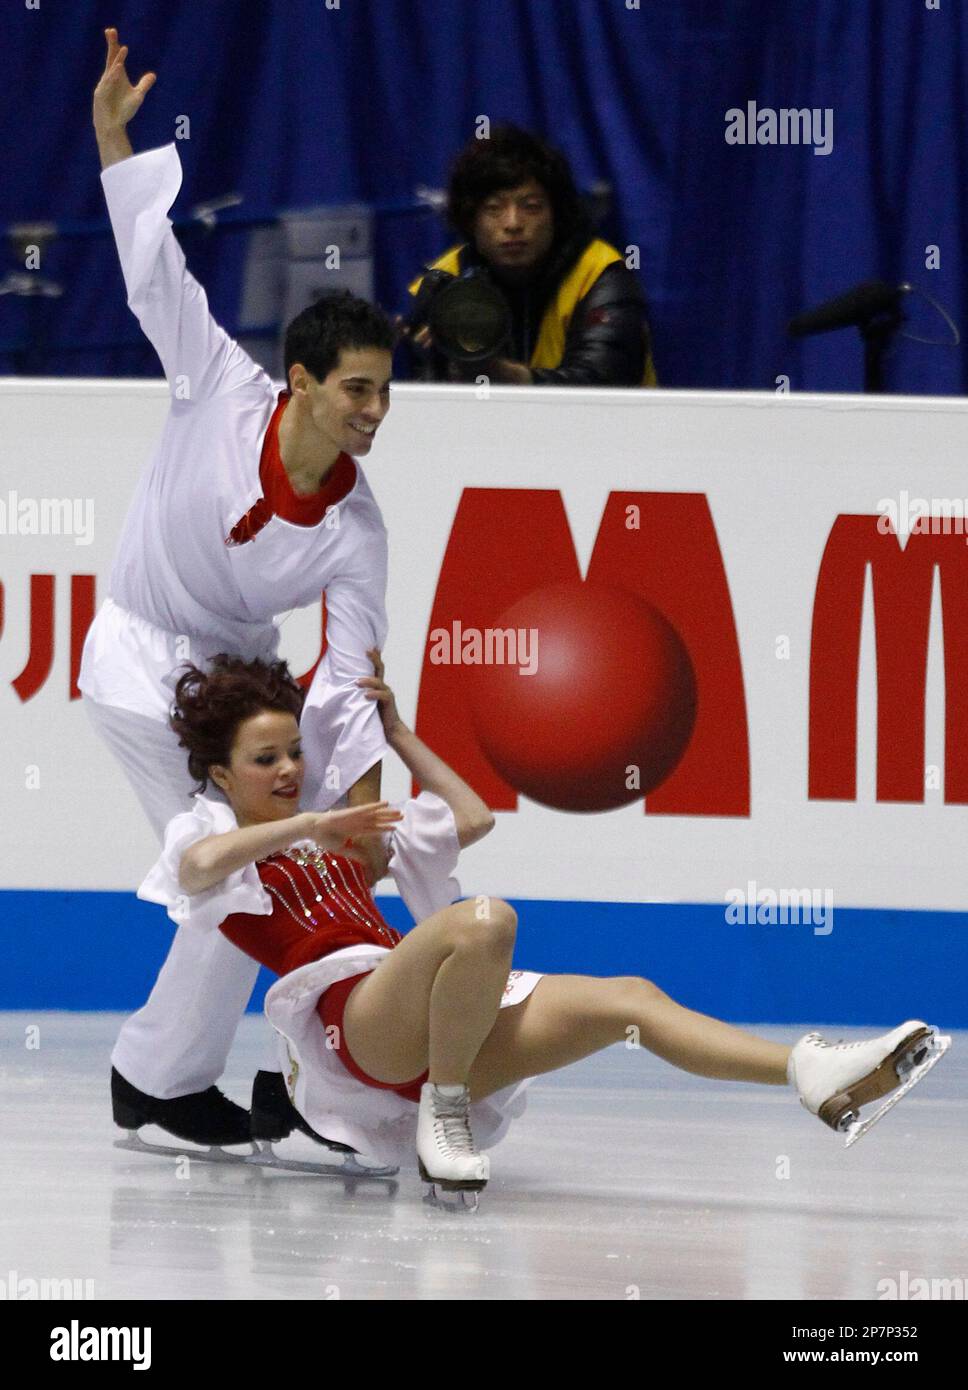 Anna Cappellini, right, and Luca Lanotte of Italy perform during the ice dance original dance at the ISU Grand Prix of Figure Skating final in Tokyo, Japan, Thursday, Dec